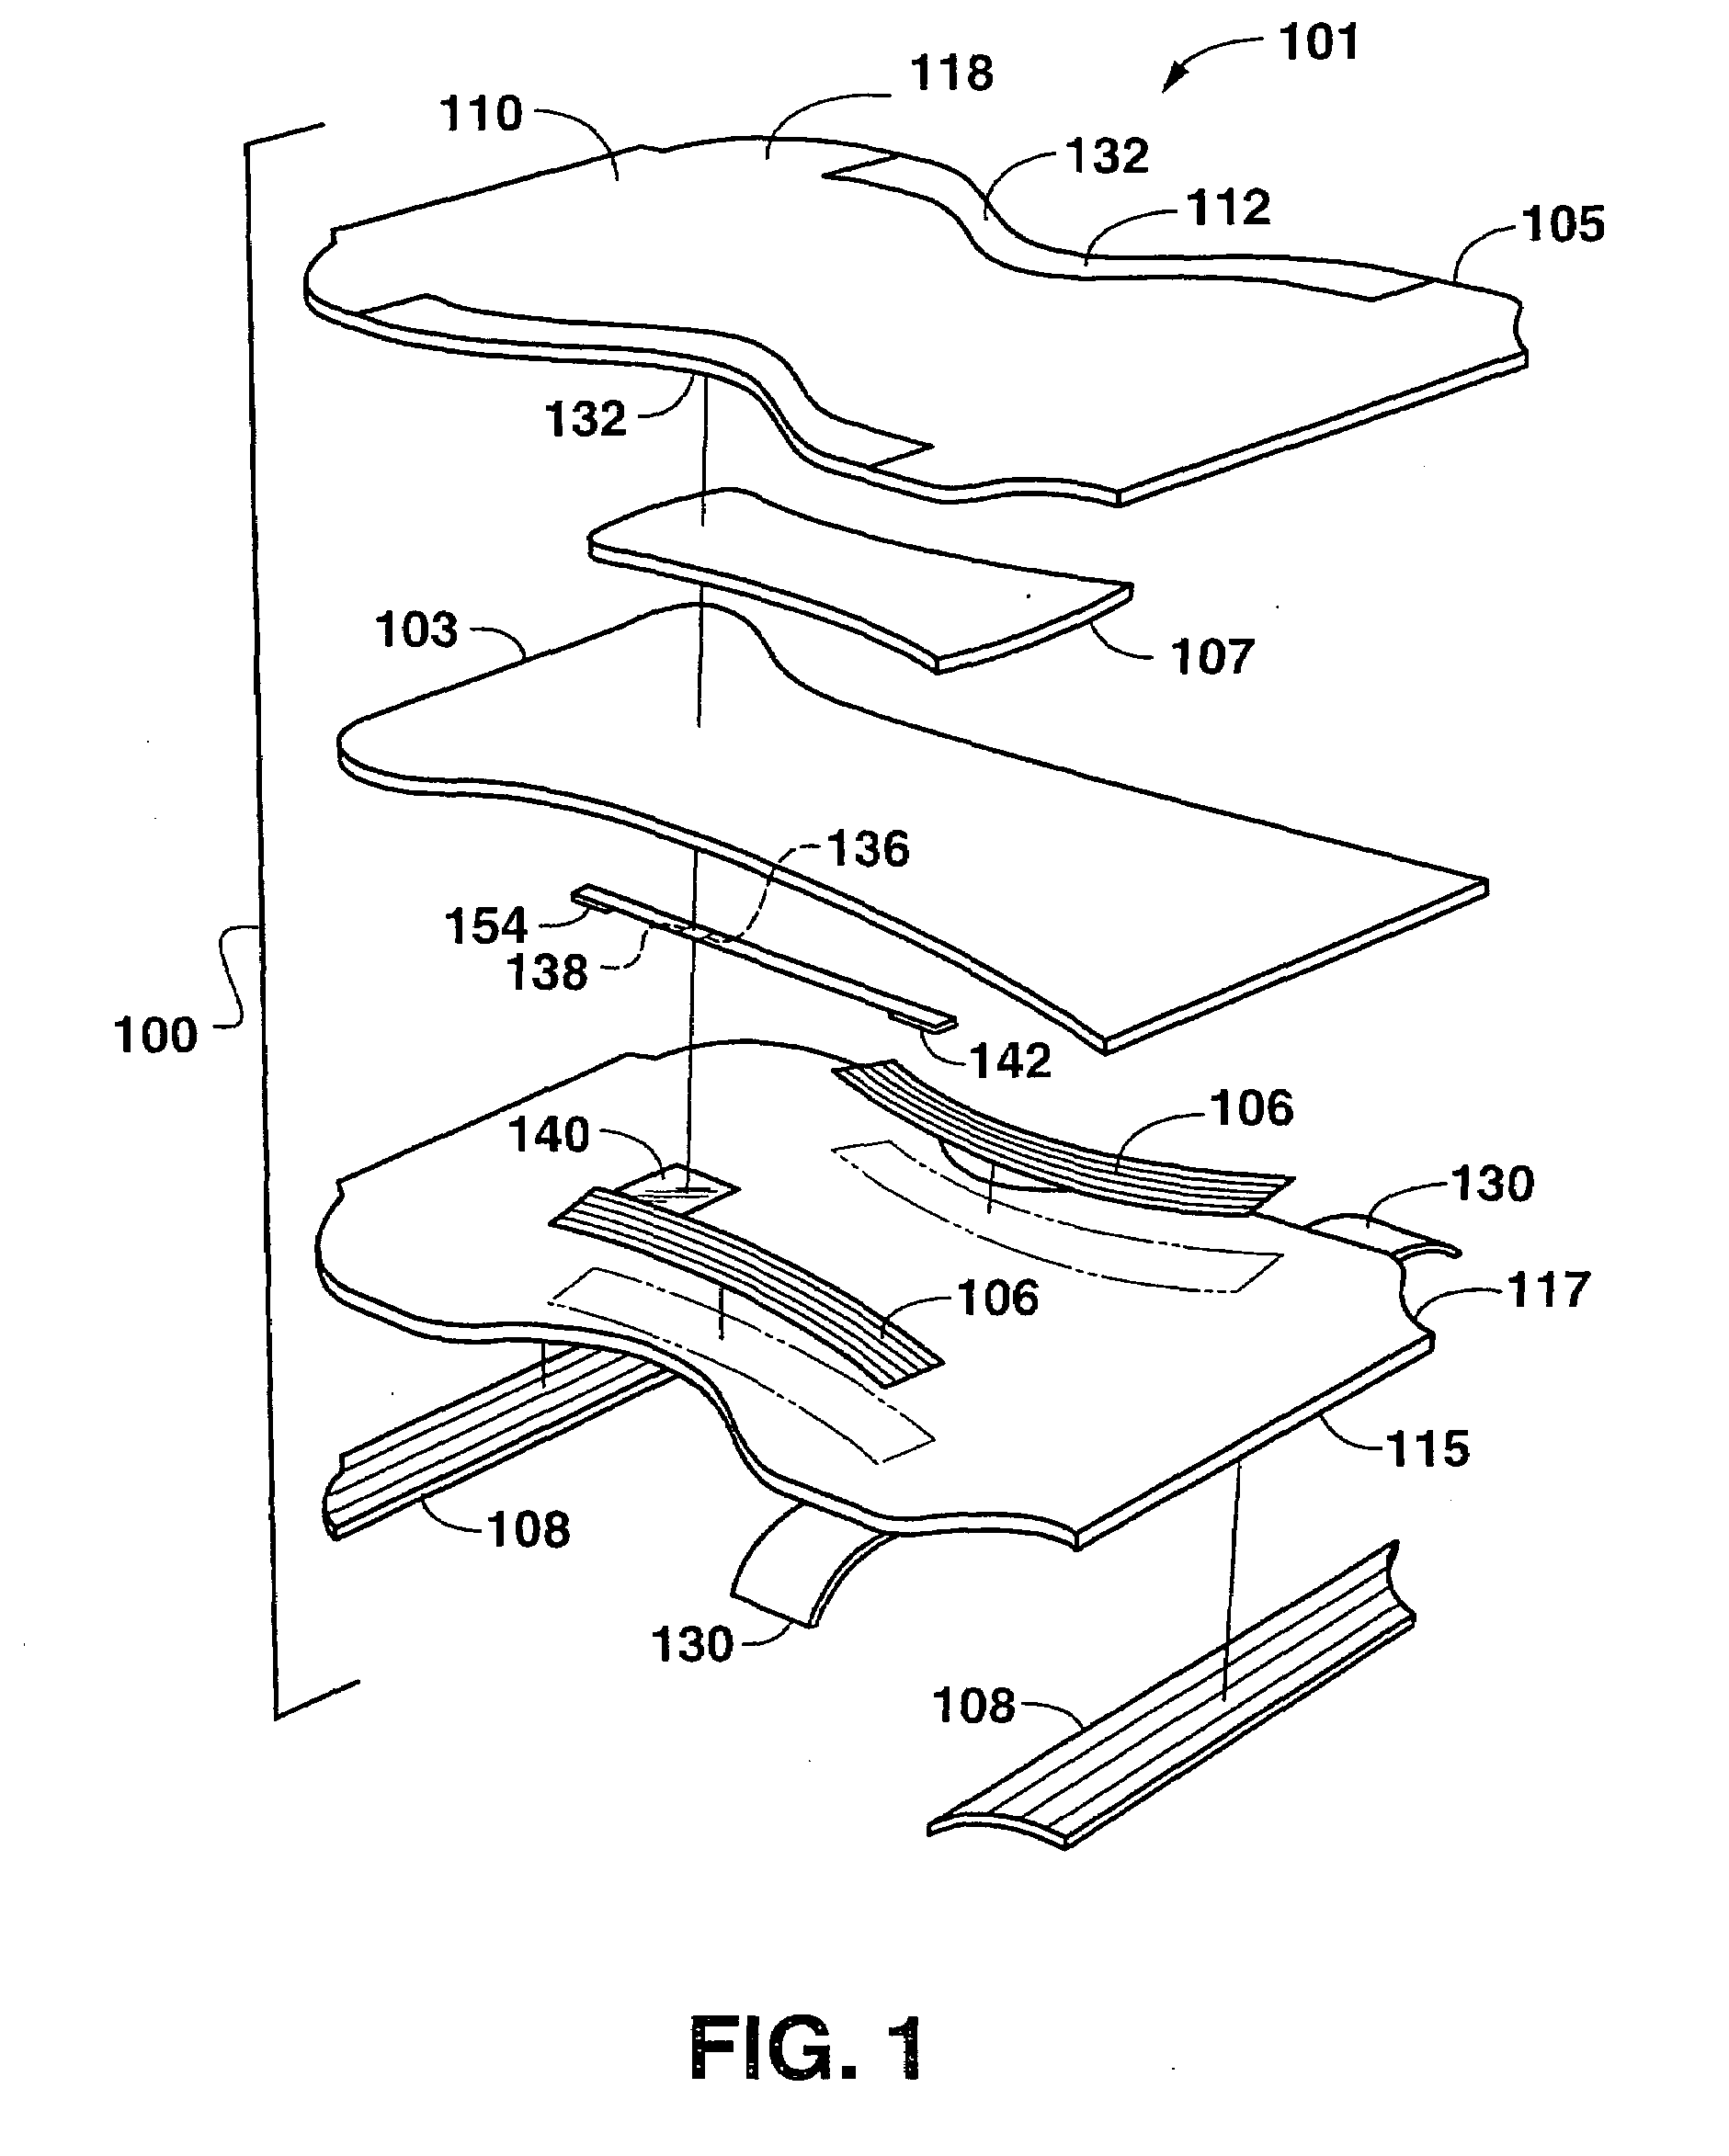 Absorbent article containing lateral flow assay device